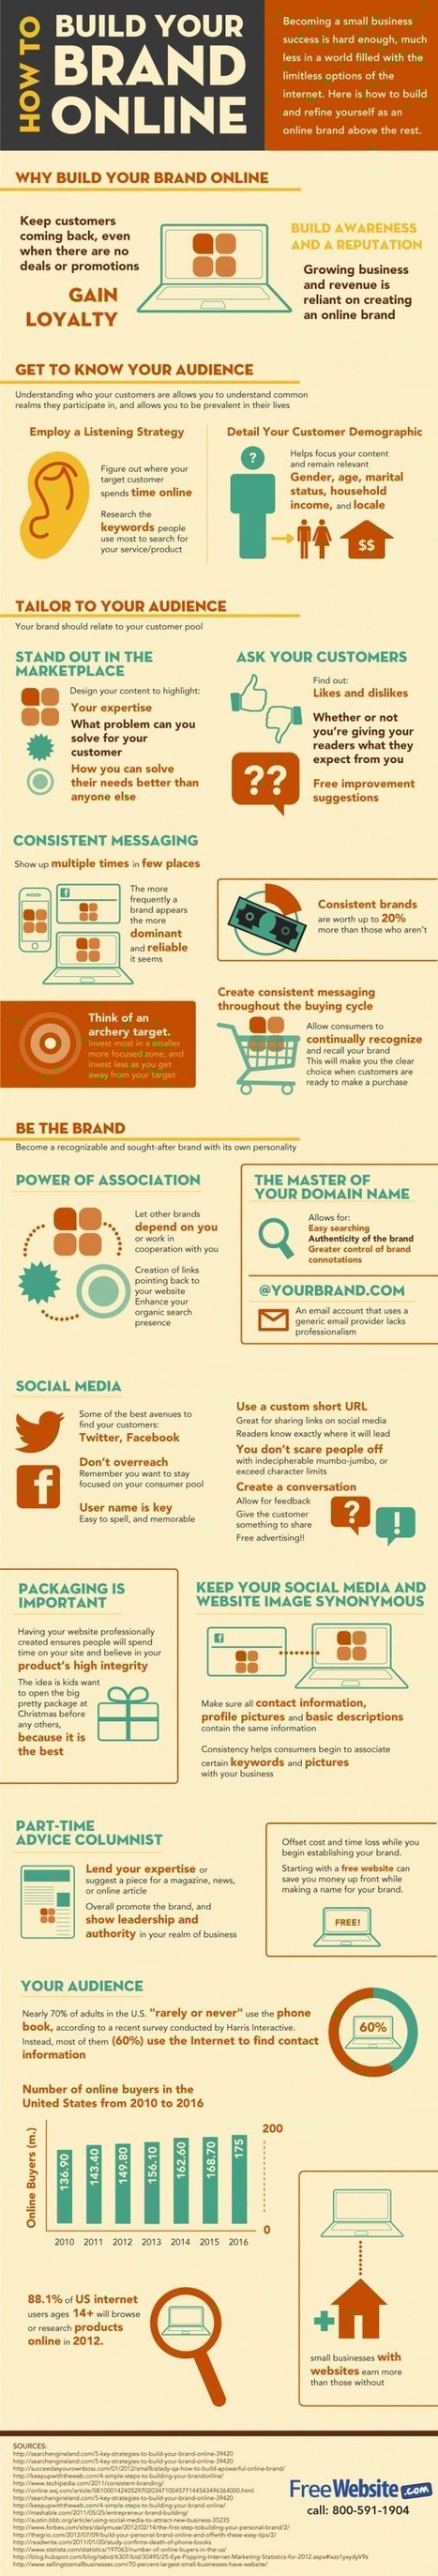 Why You Need to Build Your Brand Online [infographic] | MarketingHits | Scoop.it